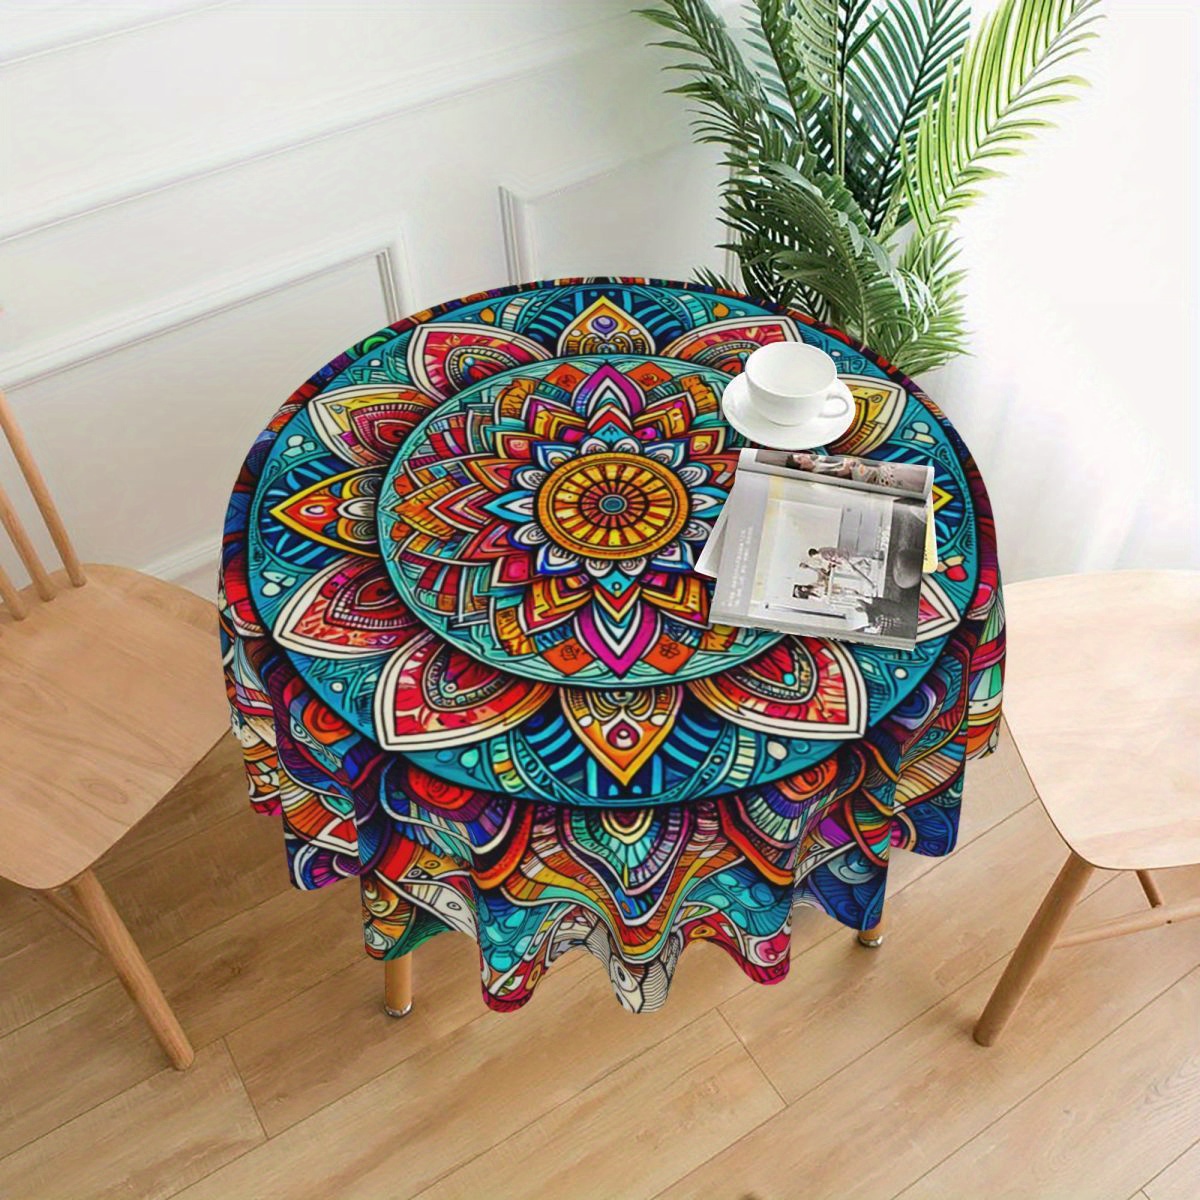 

Mandala Pattern Round Tablecloth - Decorative Polyester Table Cover, Machine Woven, Stain Resistant, Washable For Kitchen And Dining Room - Festive Home Decor, Ideal Holiday Gift